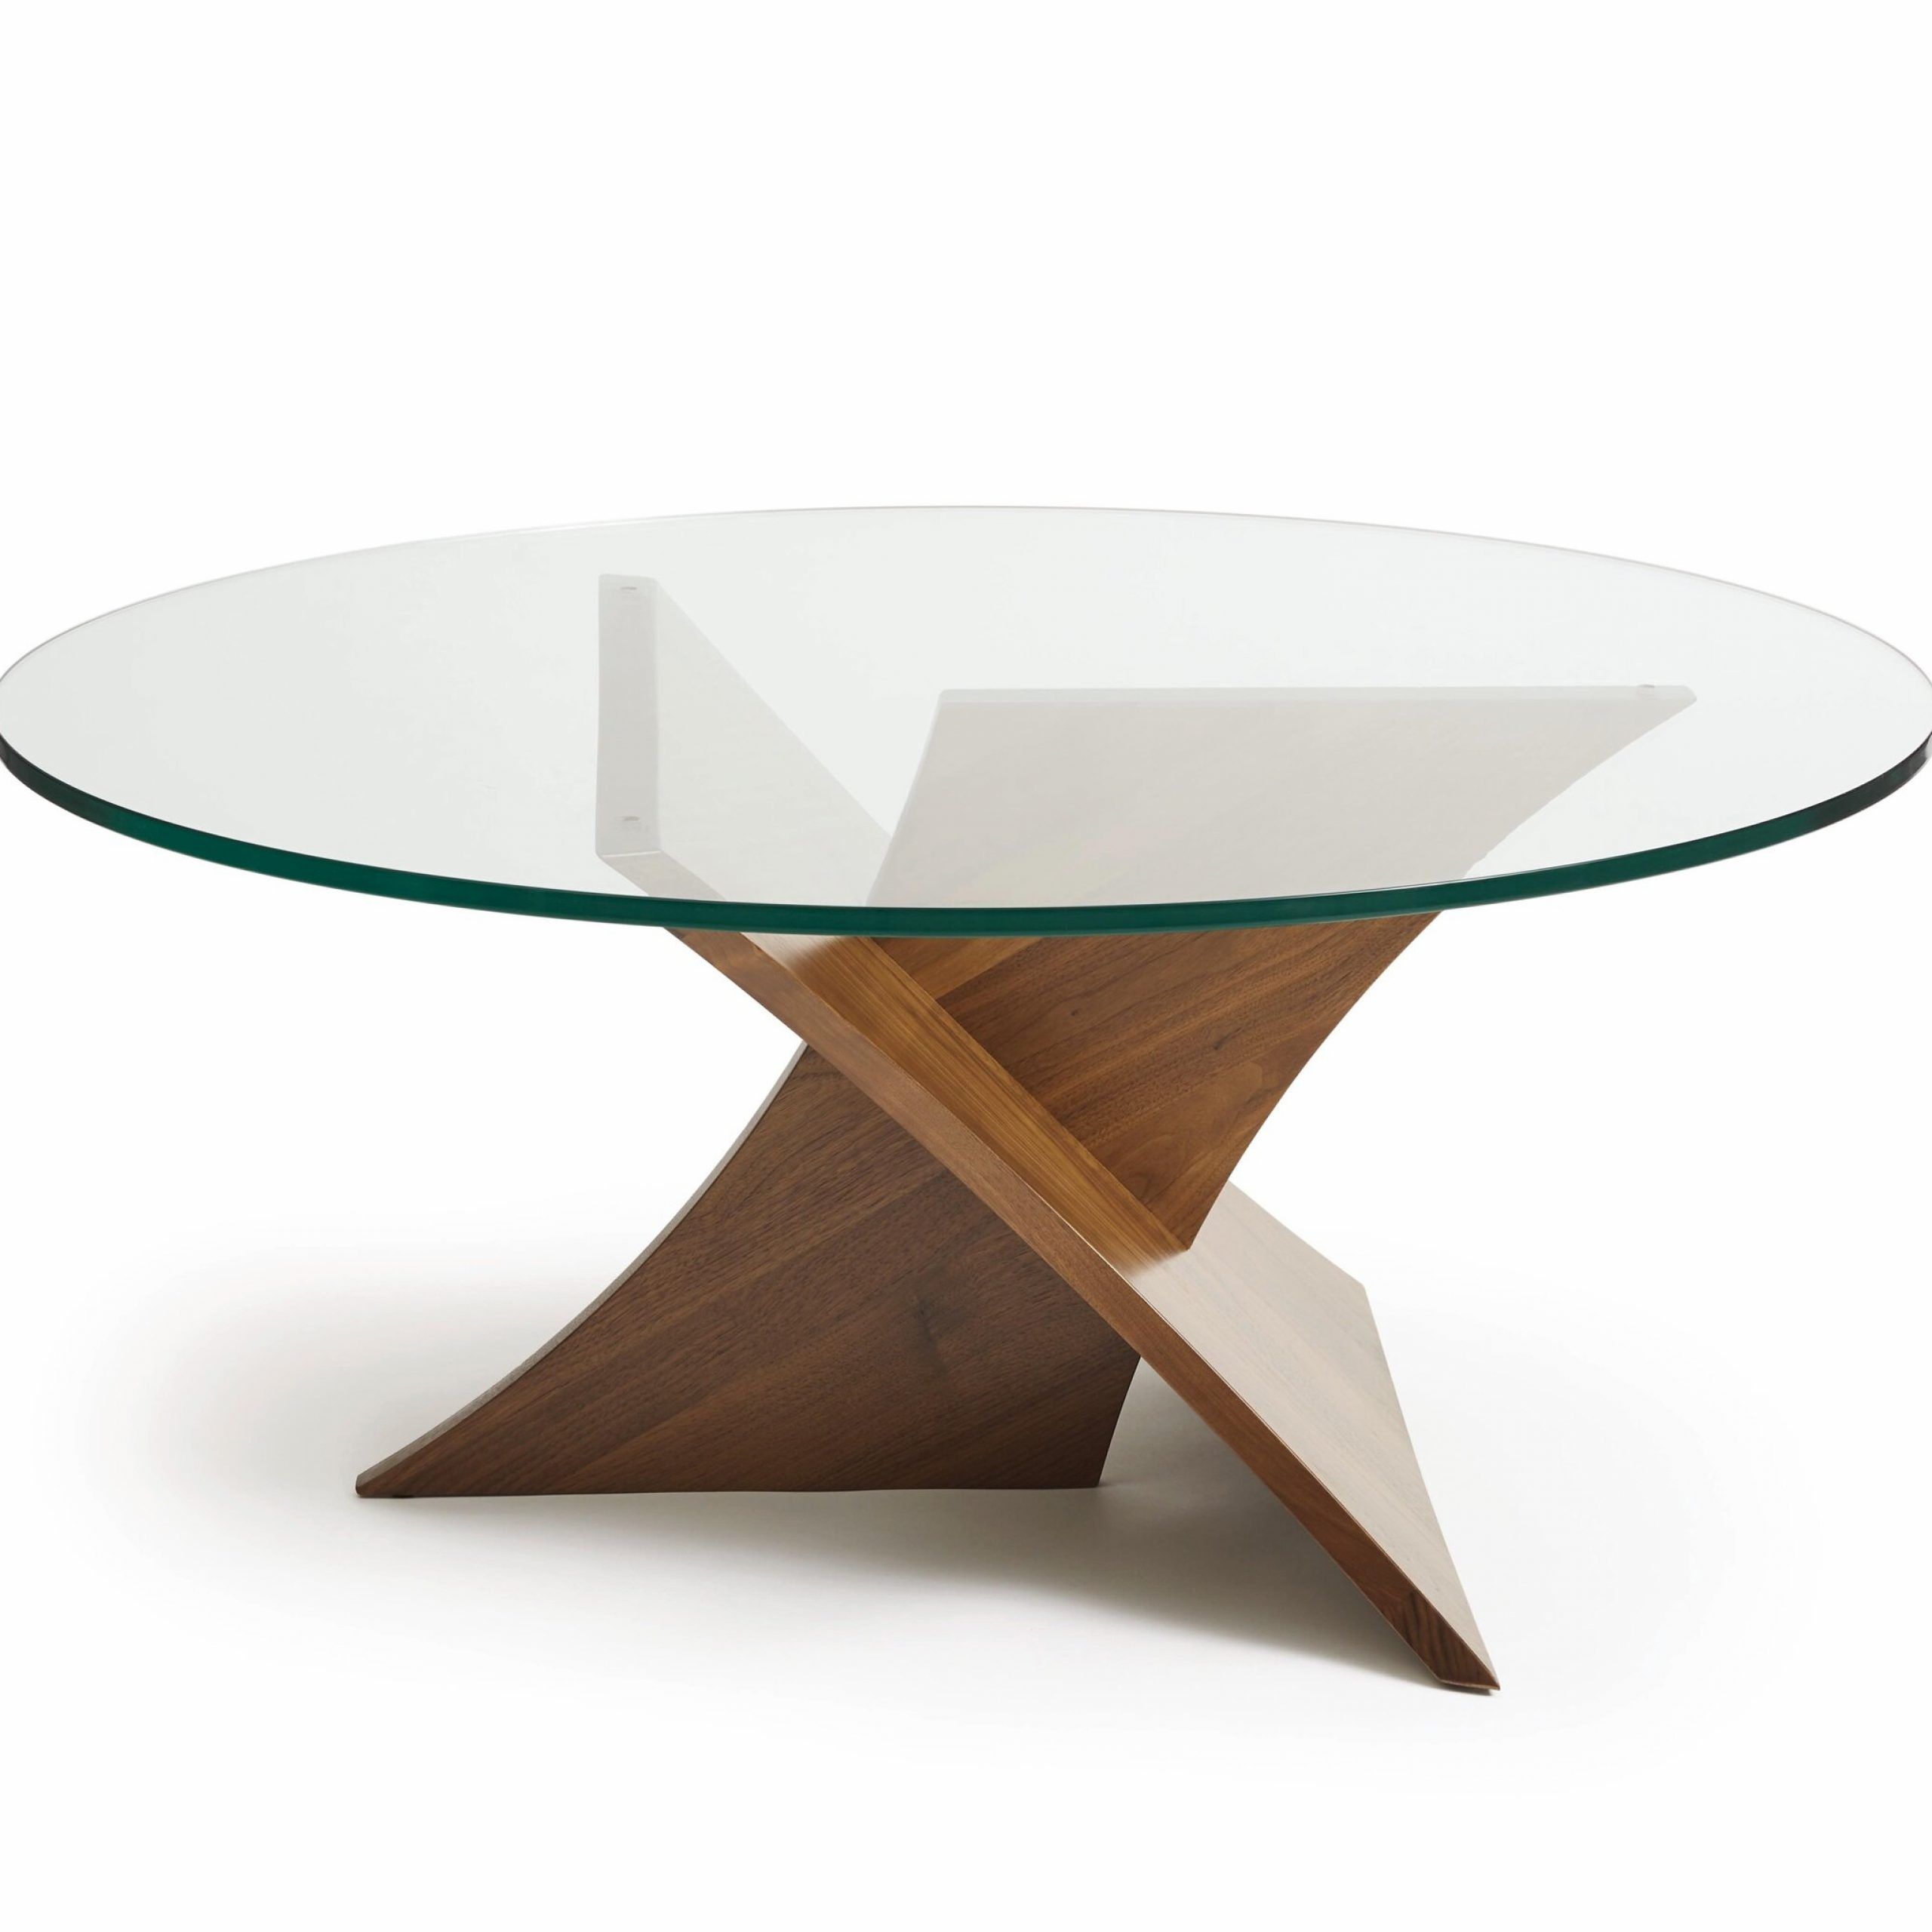 Copeland Furniture Planes Glass Top Coffee Table | Wayfair With Regard To Glass Topped Coffee Tables (View 8 of 20)